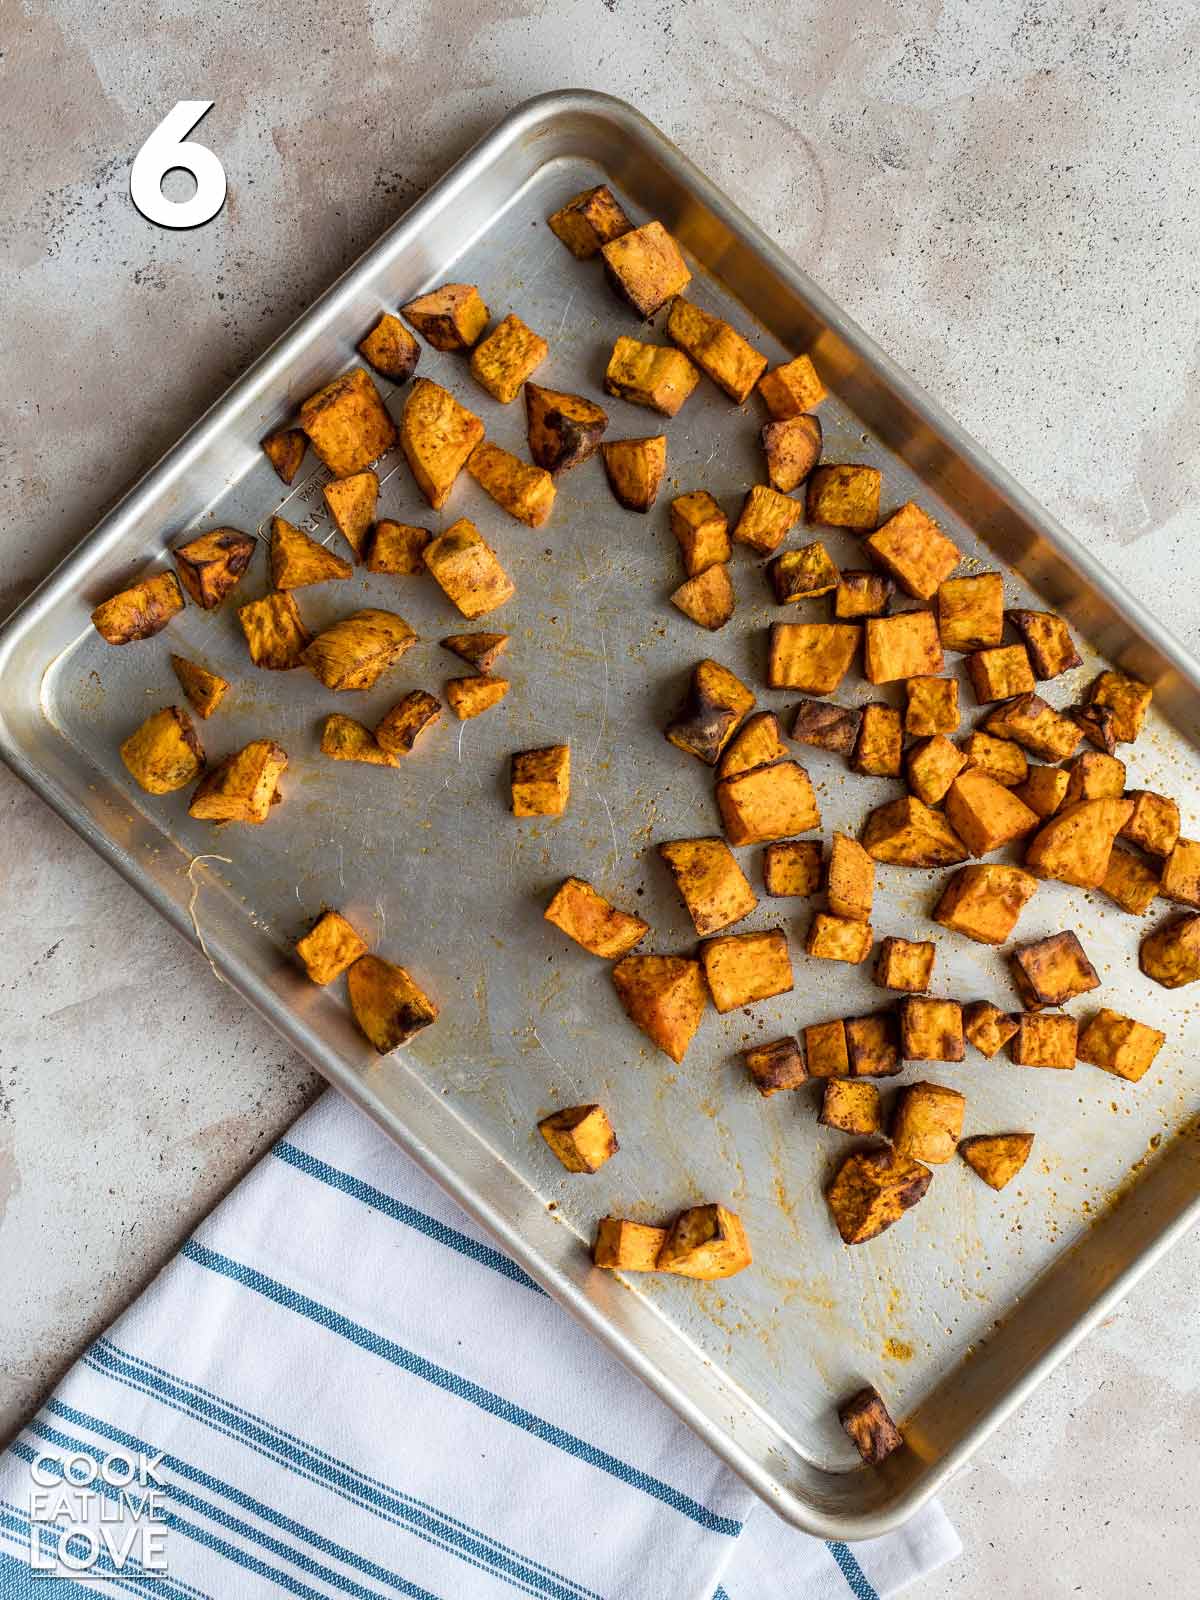 Cooked sweet potatoes on a baking sheet.